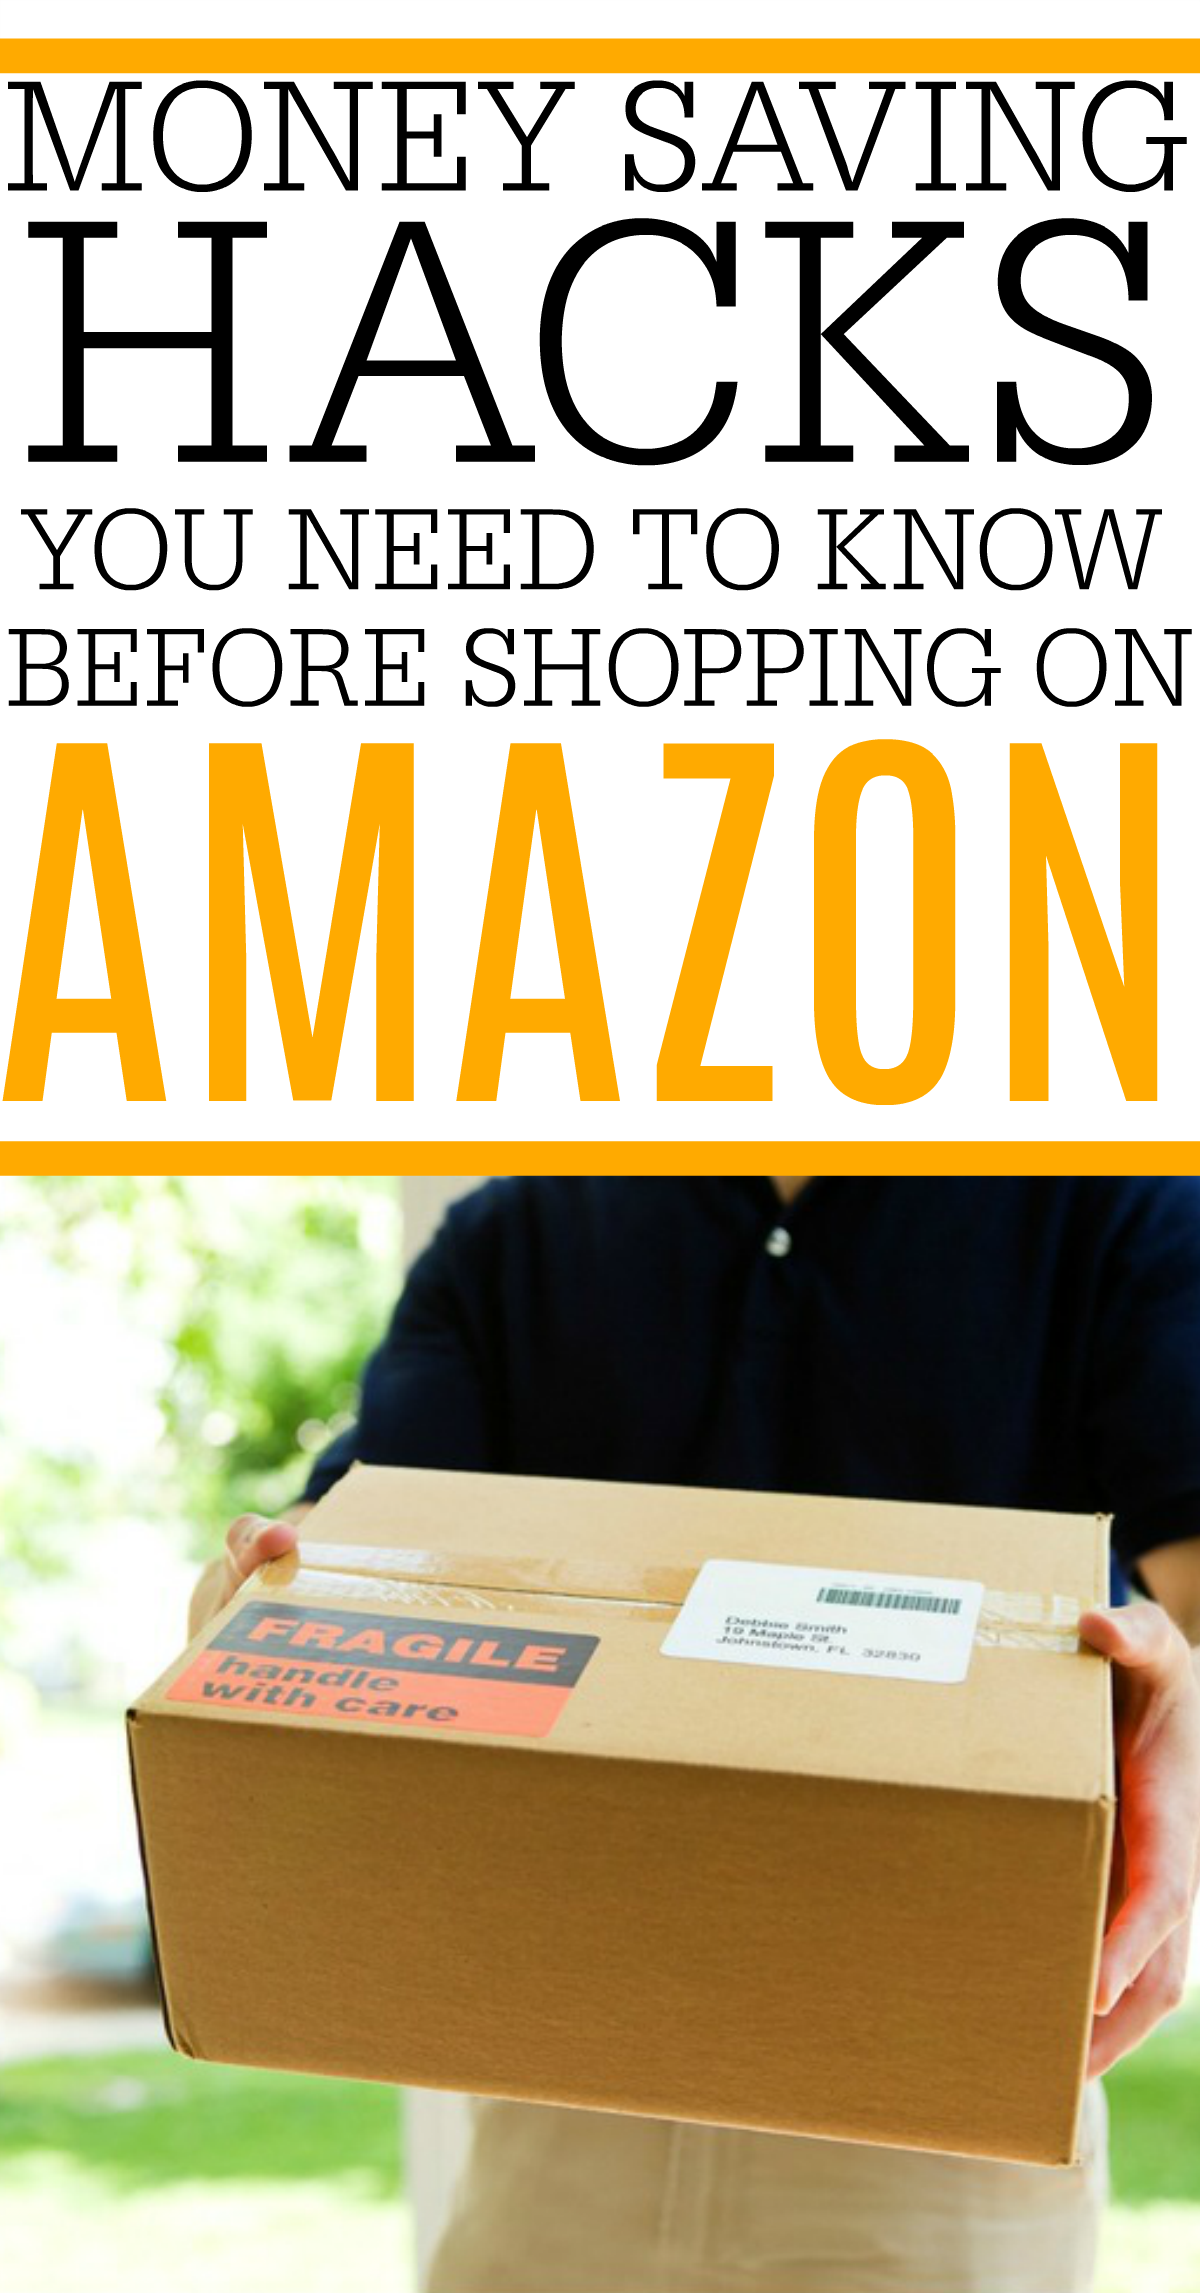 Money Saving Hacks You Need To Know Before Shopping on Amazon